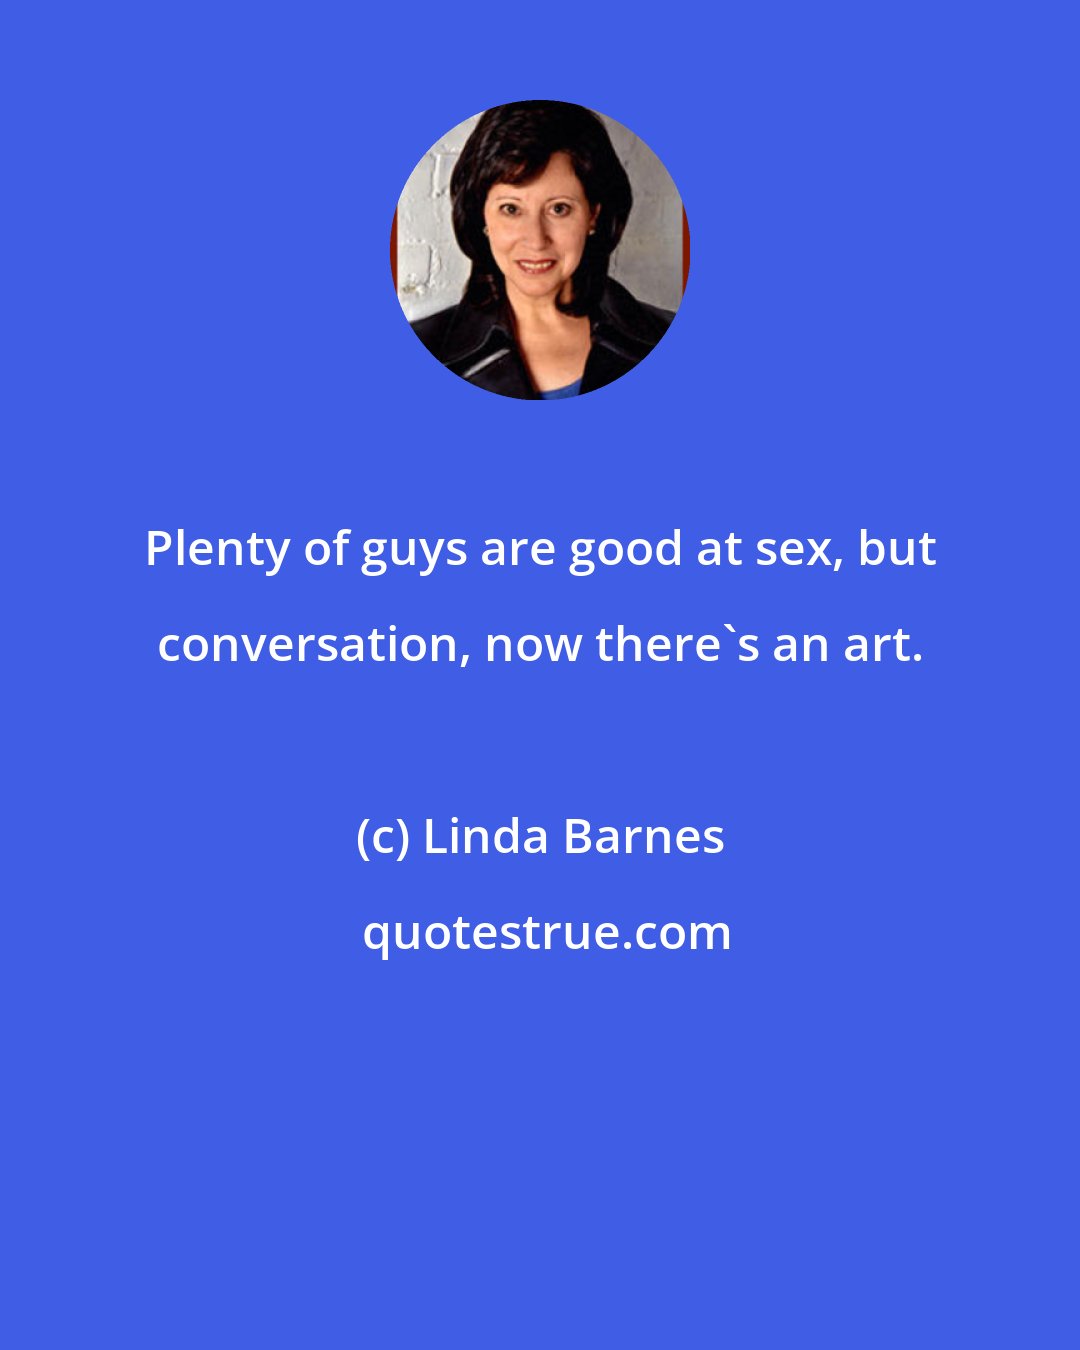 Linda Barnes: Plenty of guys are good at sex, but conversation, now there's an art.